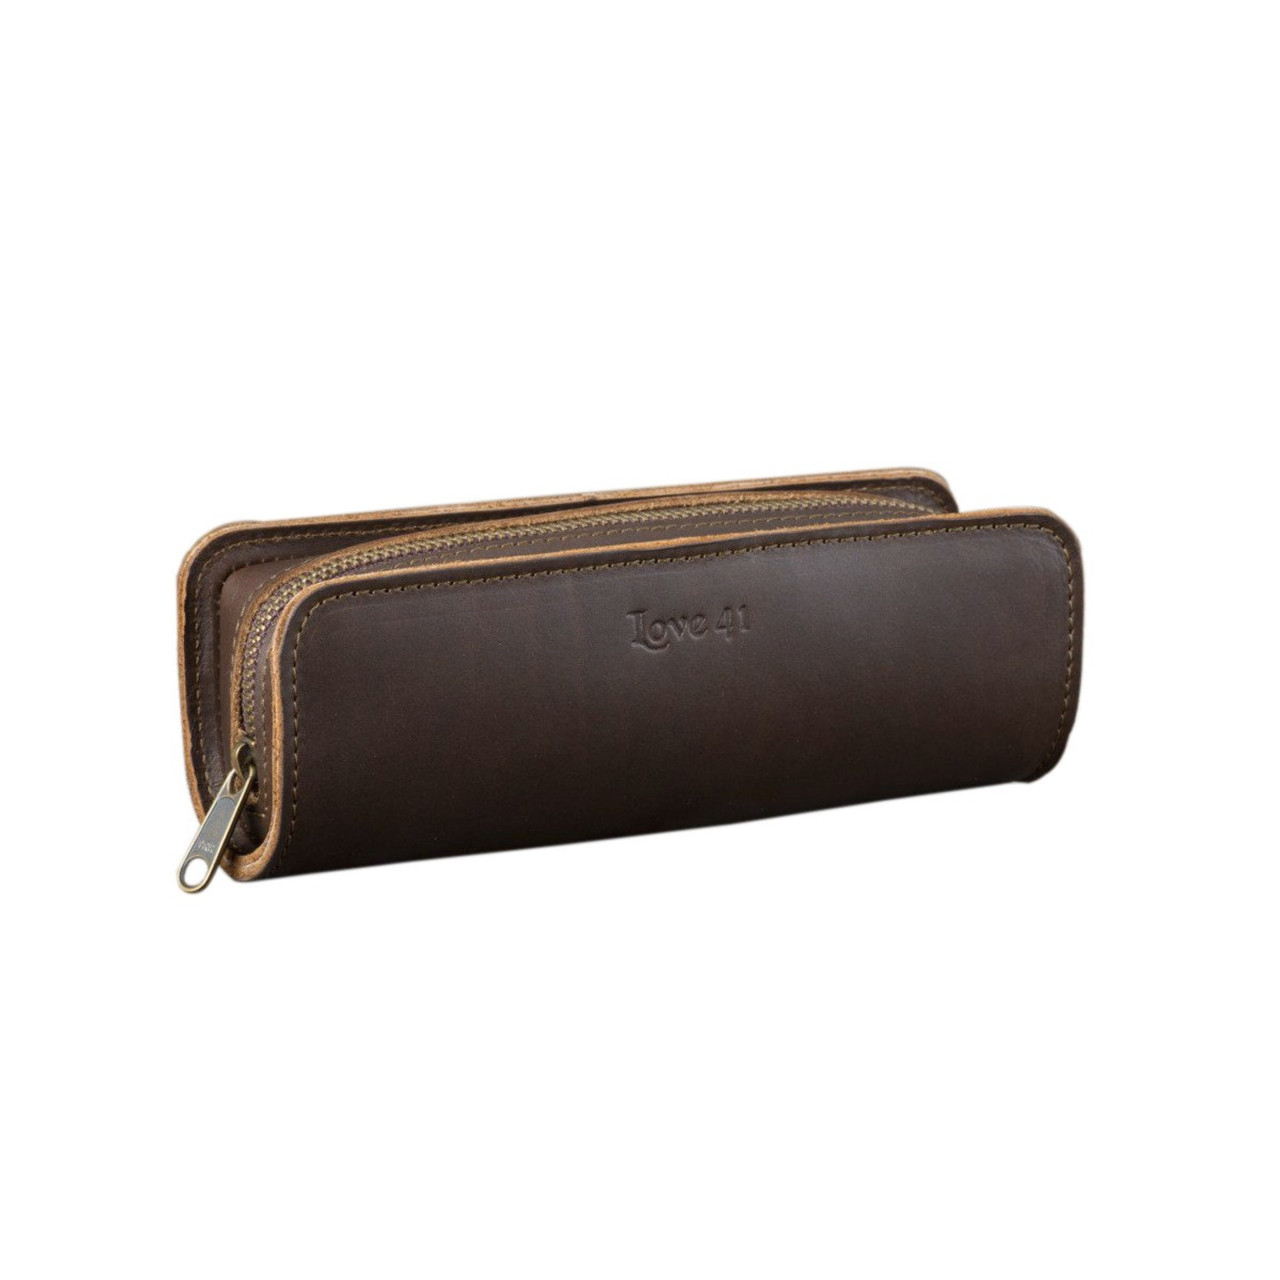 leather pencil cases – Choosing Keeping